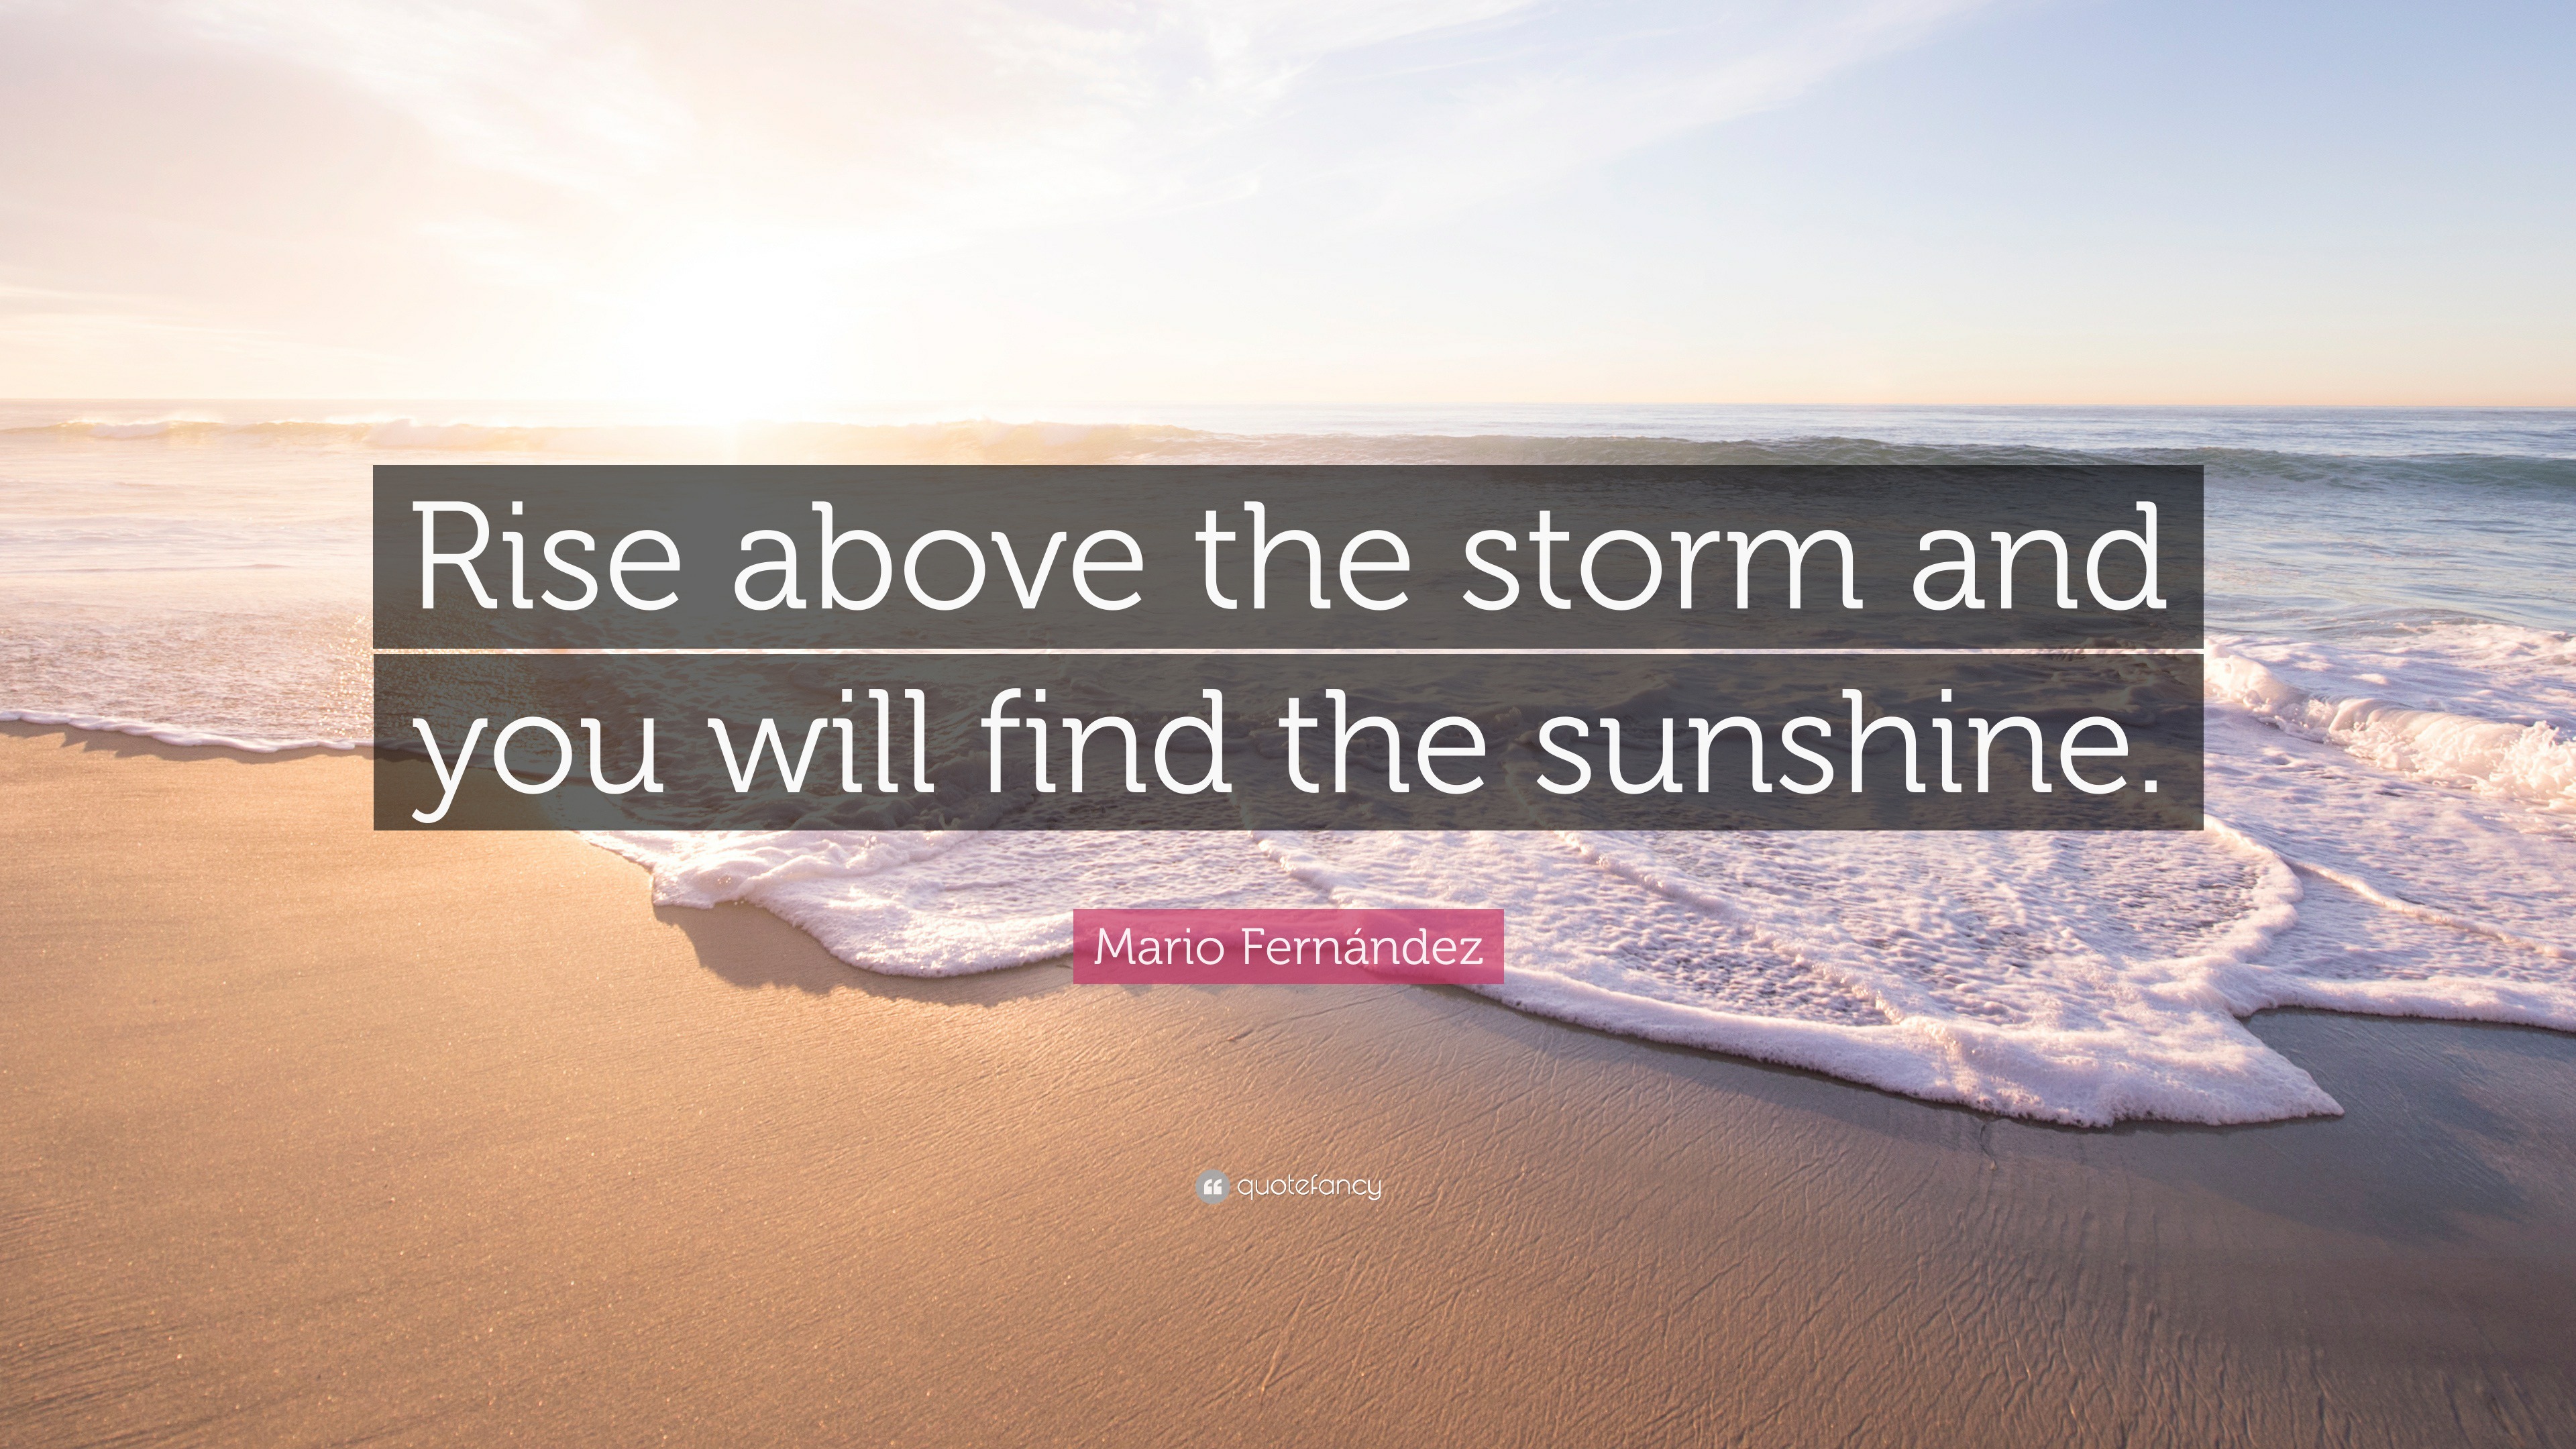 https://quotefancy.com/media/wallpaper/3840x2160/7691908-Mario-Fern-ndez-Quote-Rise-above-the-storm-and-you-will-find-the.jpg